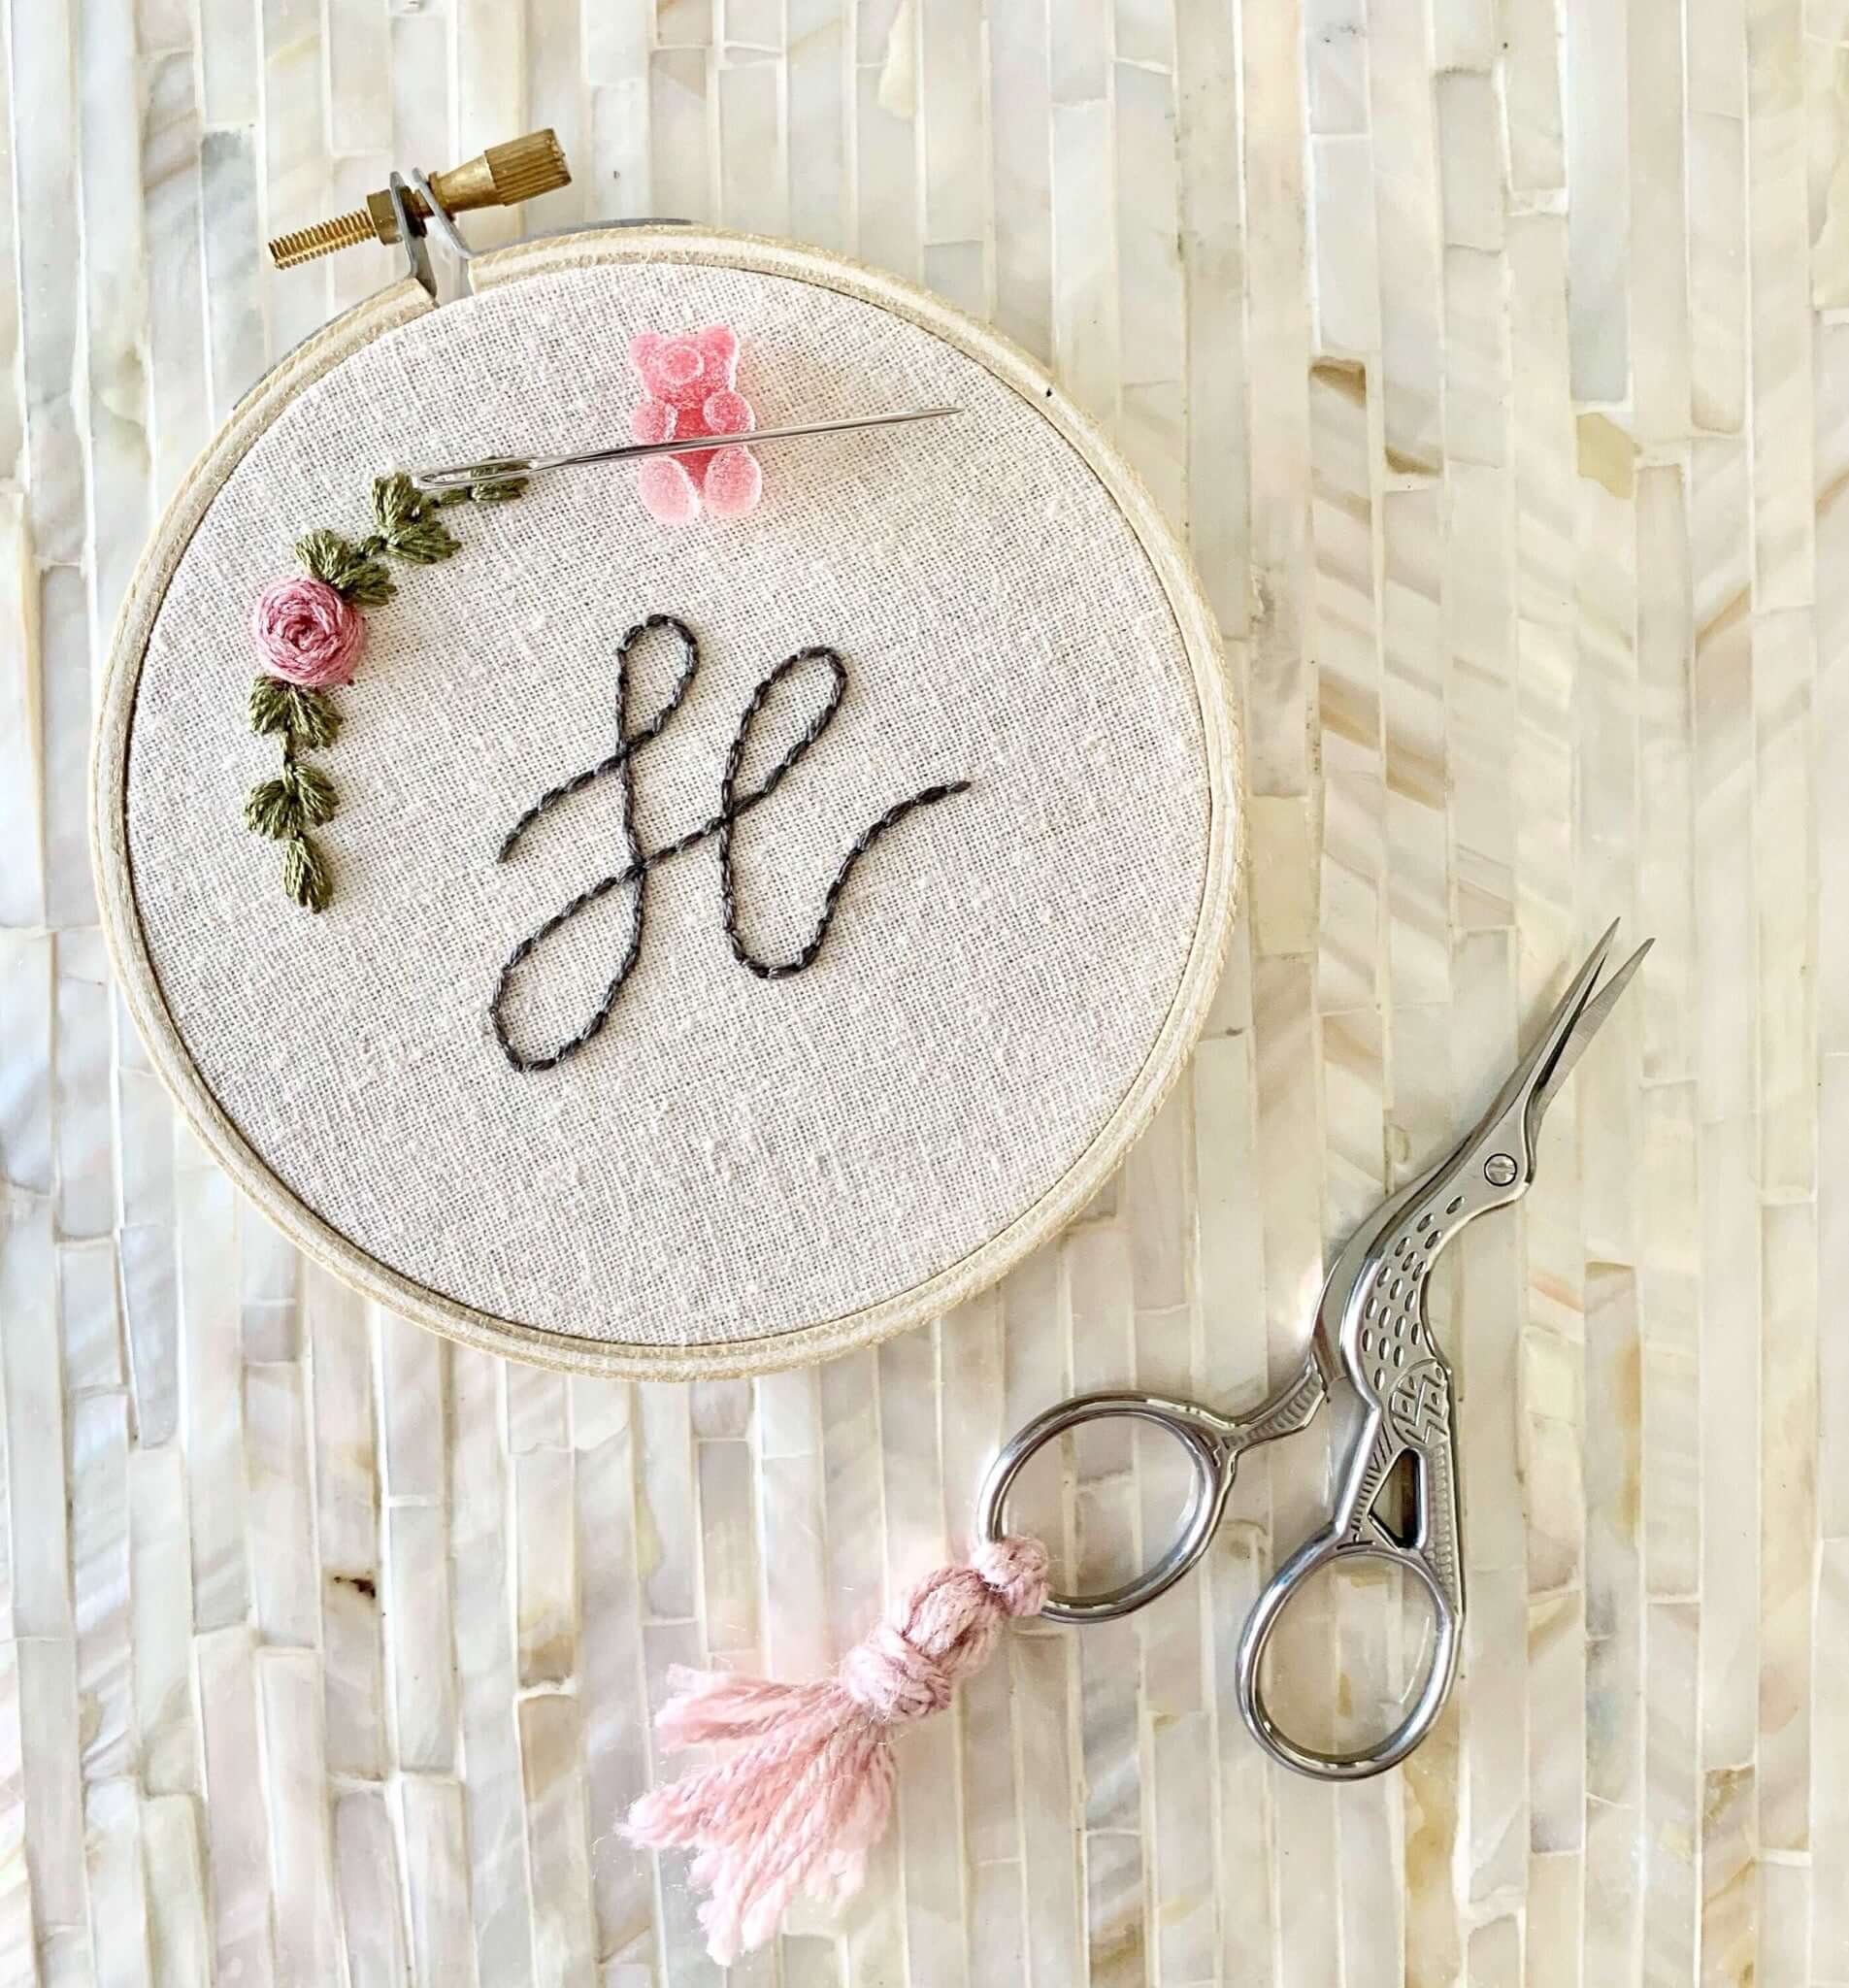 Silver bird sewing scissors with a pink tassel next to an embroidery hoop